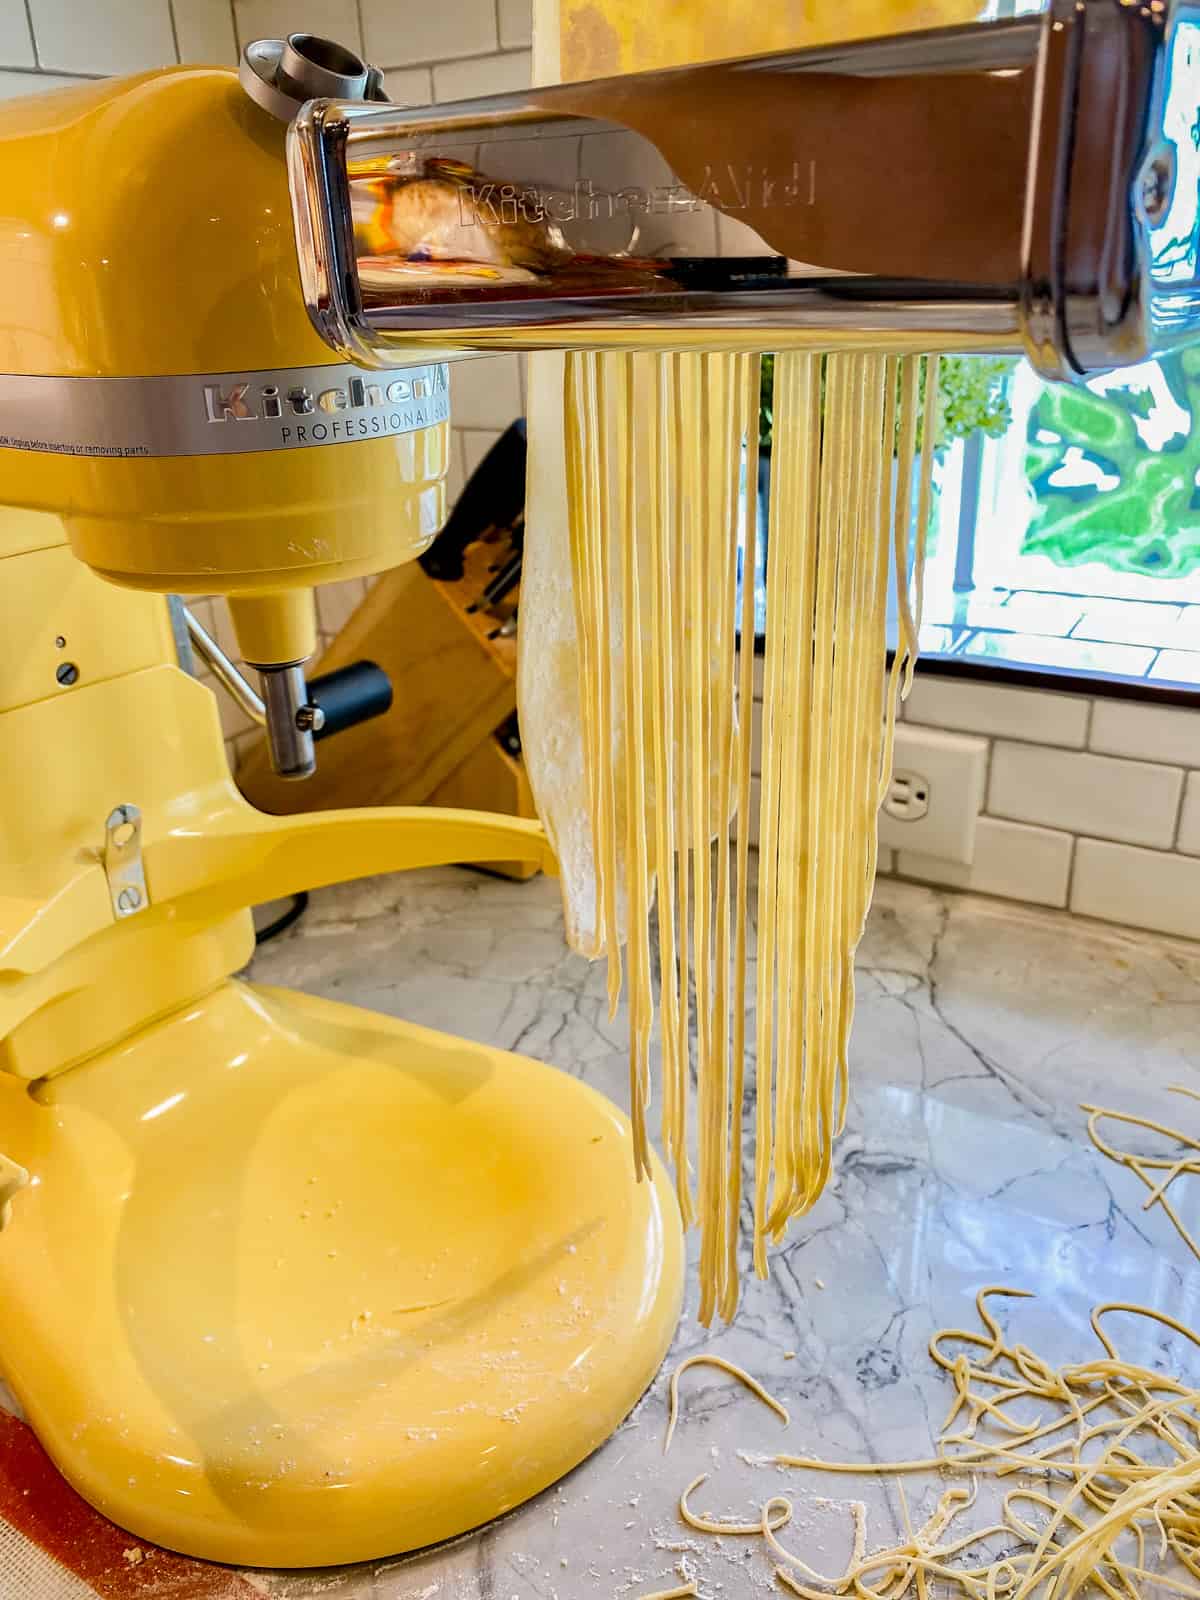 KitchenAid stand mixer with a pasta attachment with spaghetti noodles being made.